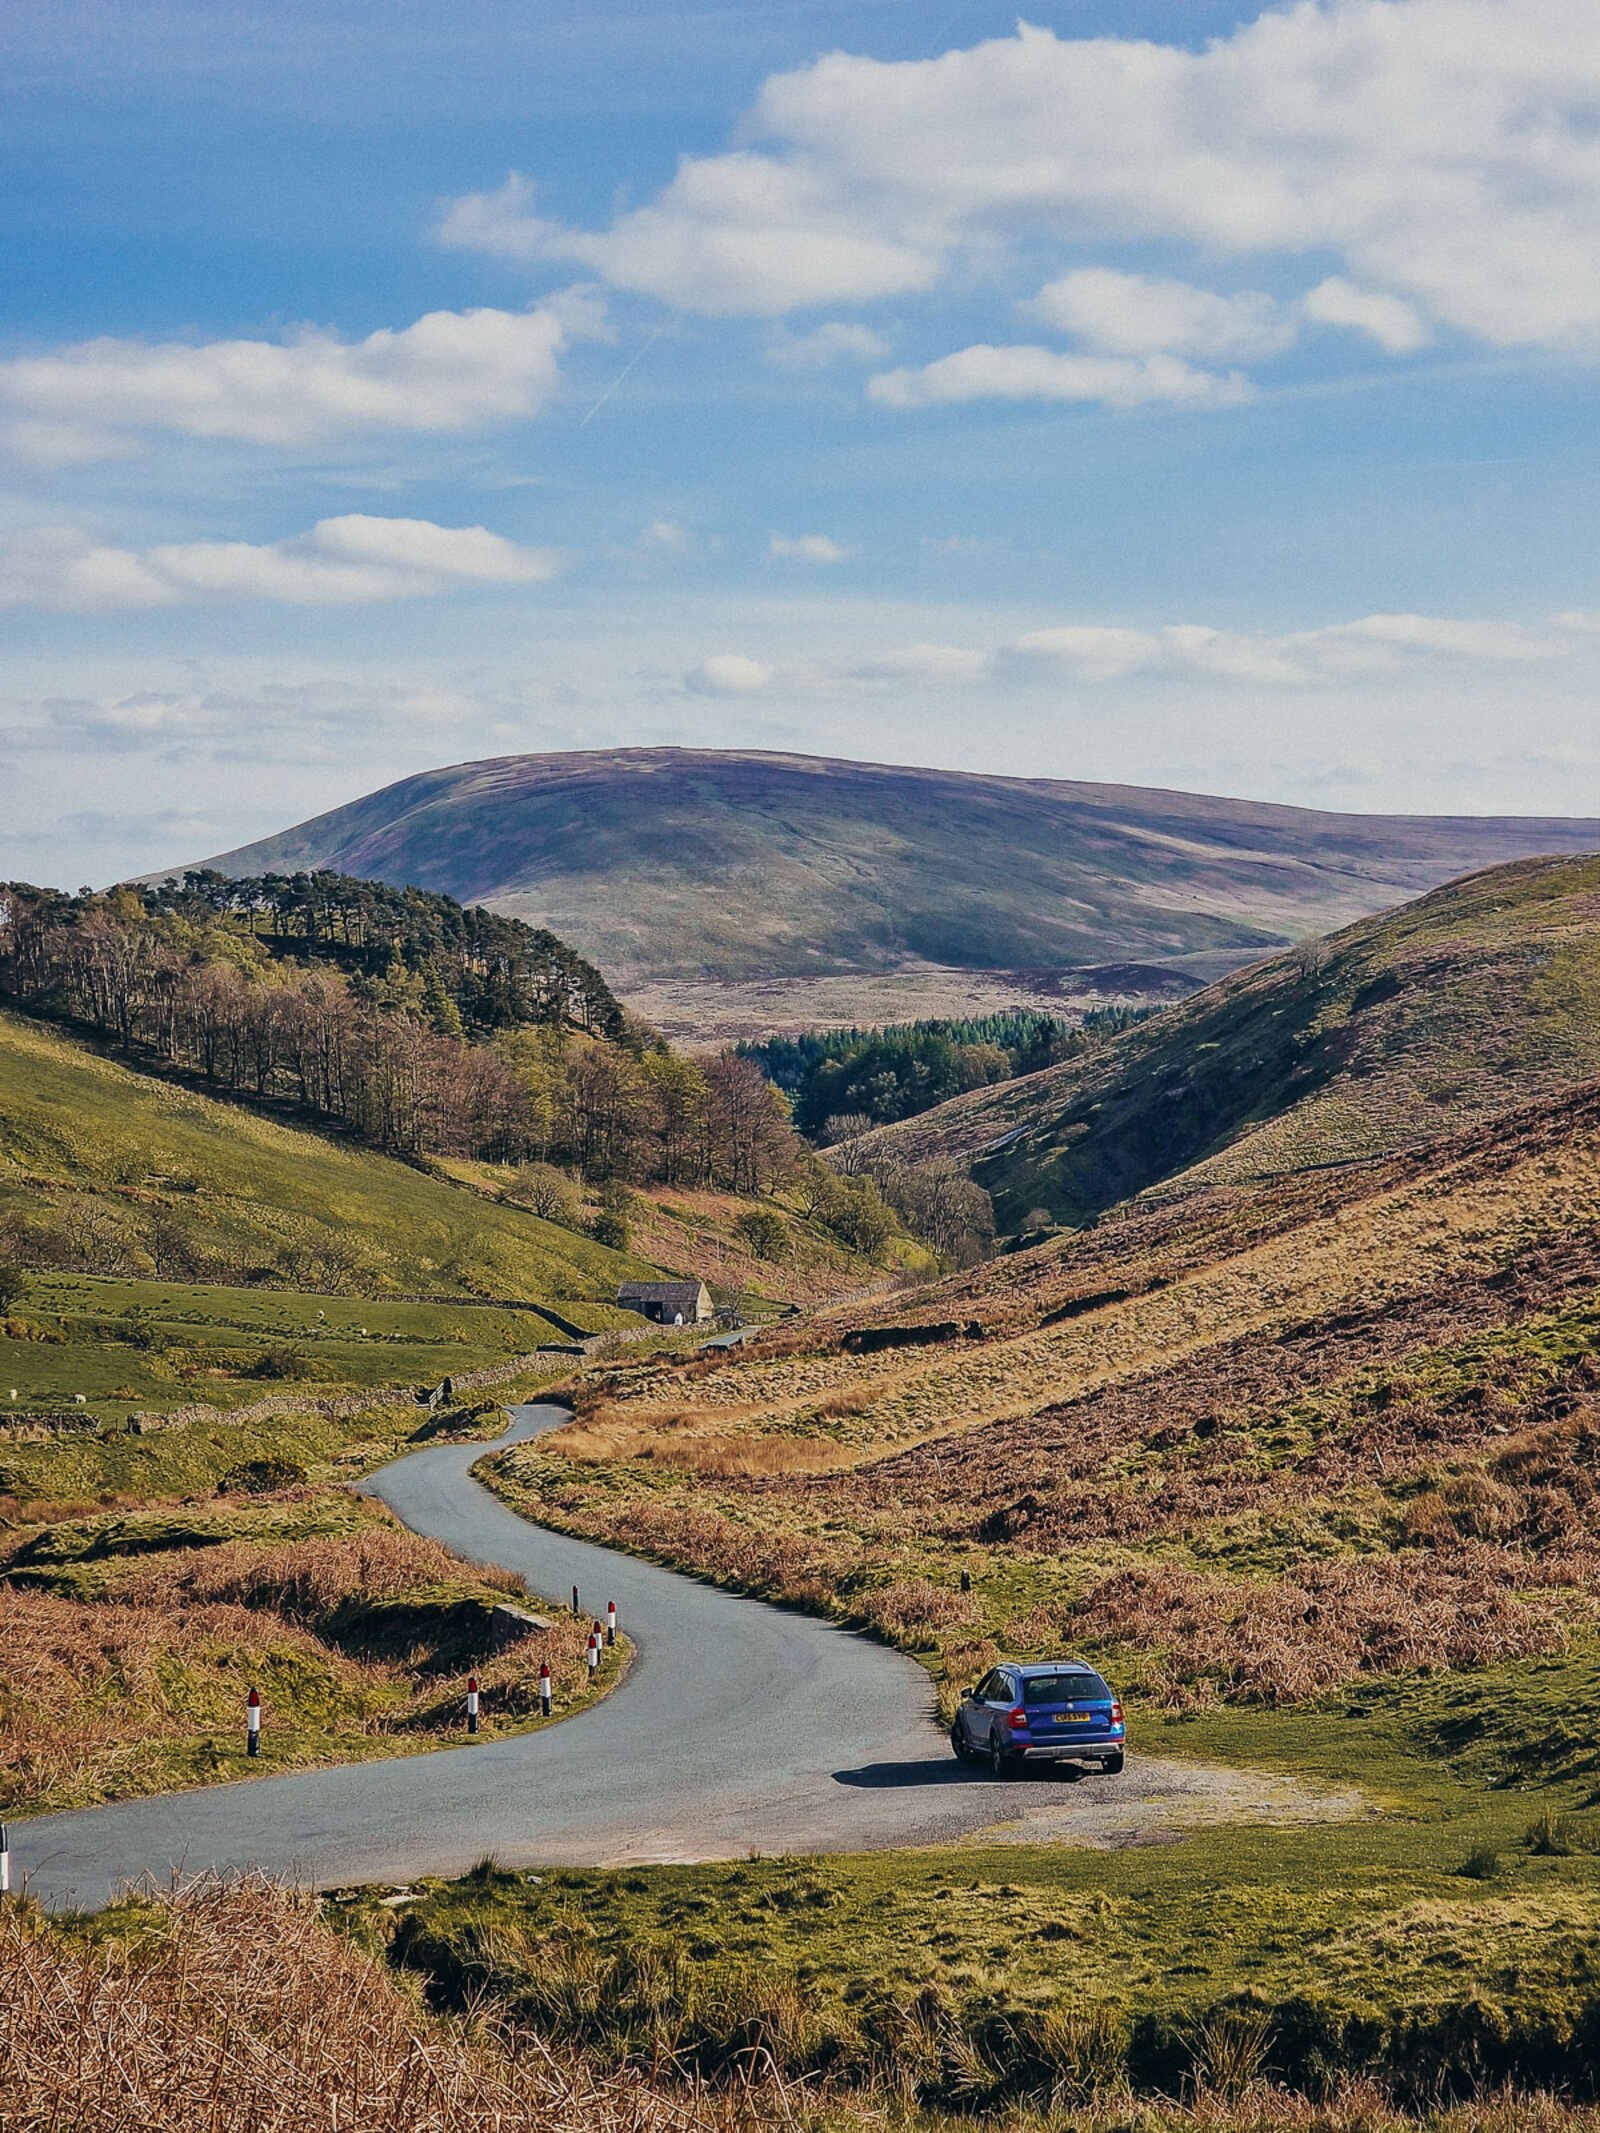 forest of bowland road trip through the countryside with a winding road and a car in the distance